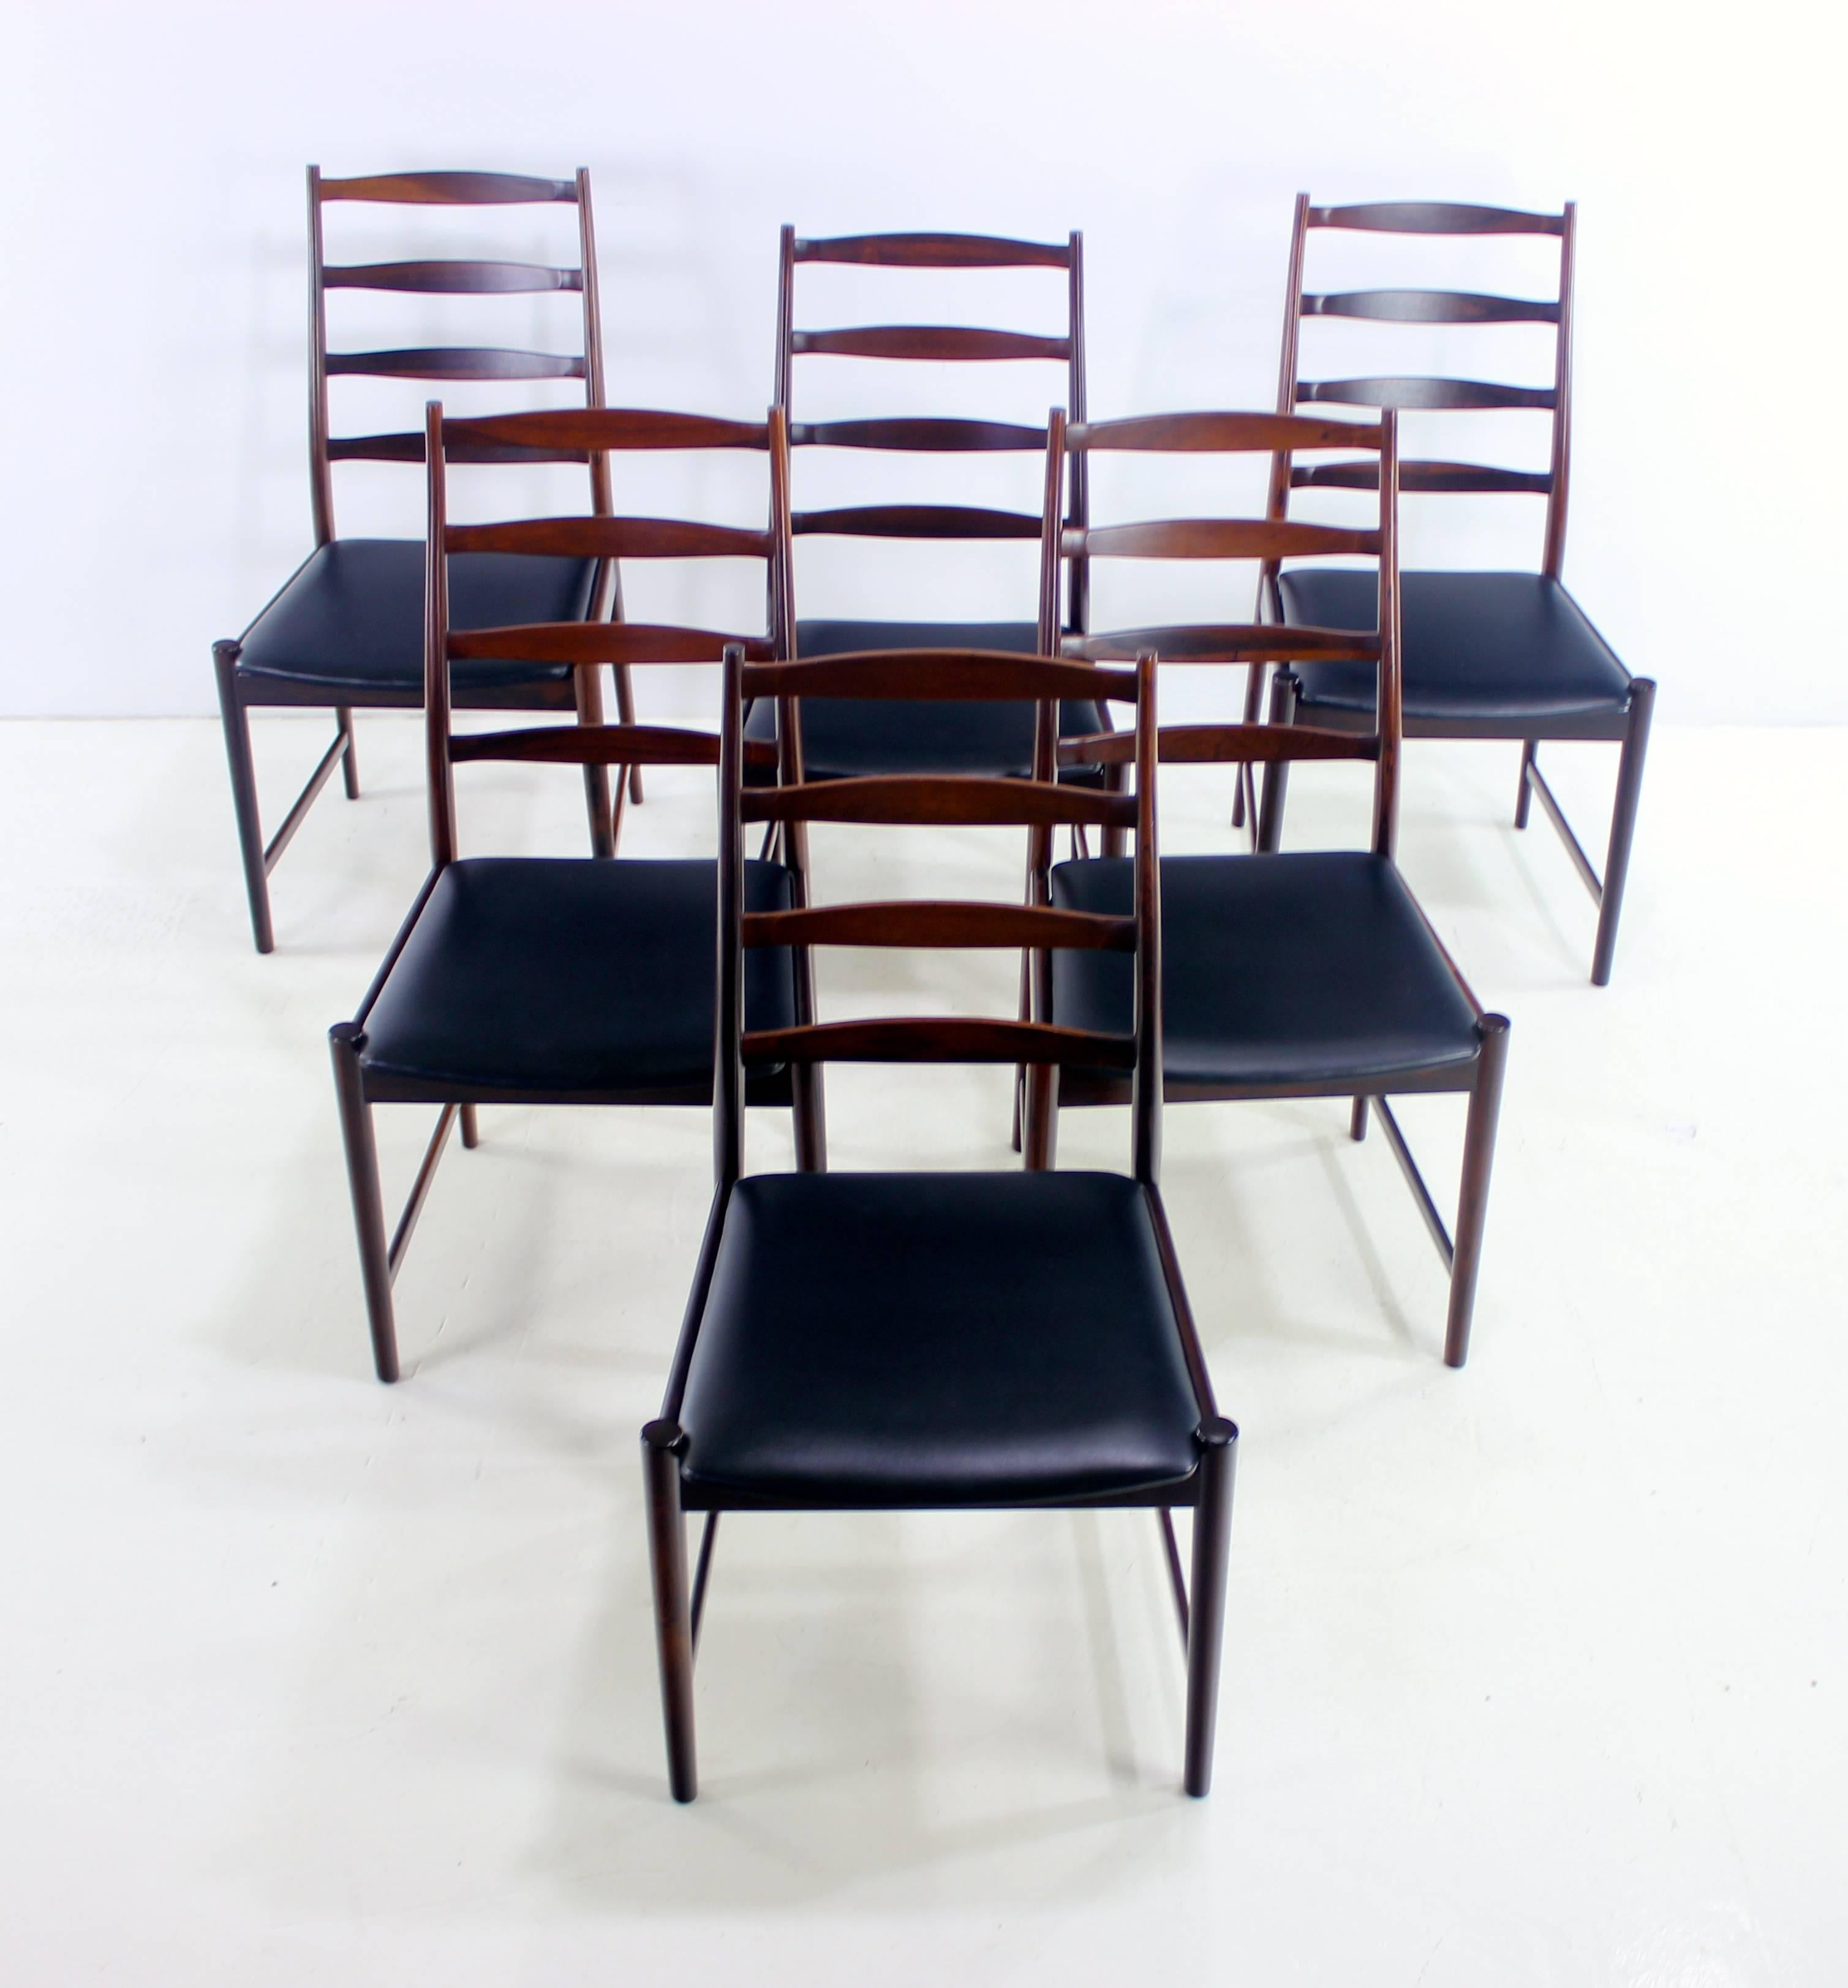 Six Danish modern ladder back dining chairs designed by Torbjørn Afdal.
Vamo Sonderborg, maker.
Rich rosewood frames with striking, sculptural style from every angle.
Original black upholstery.
Professionally restored and refinished by